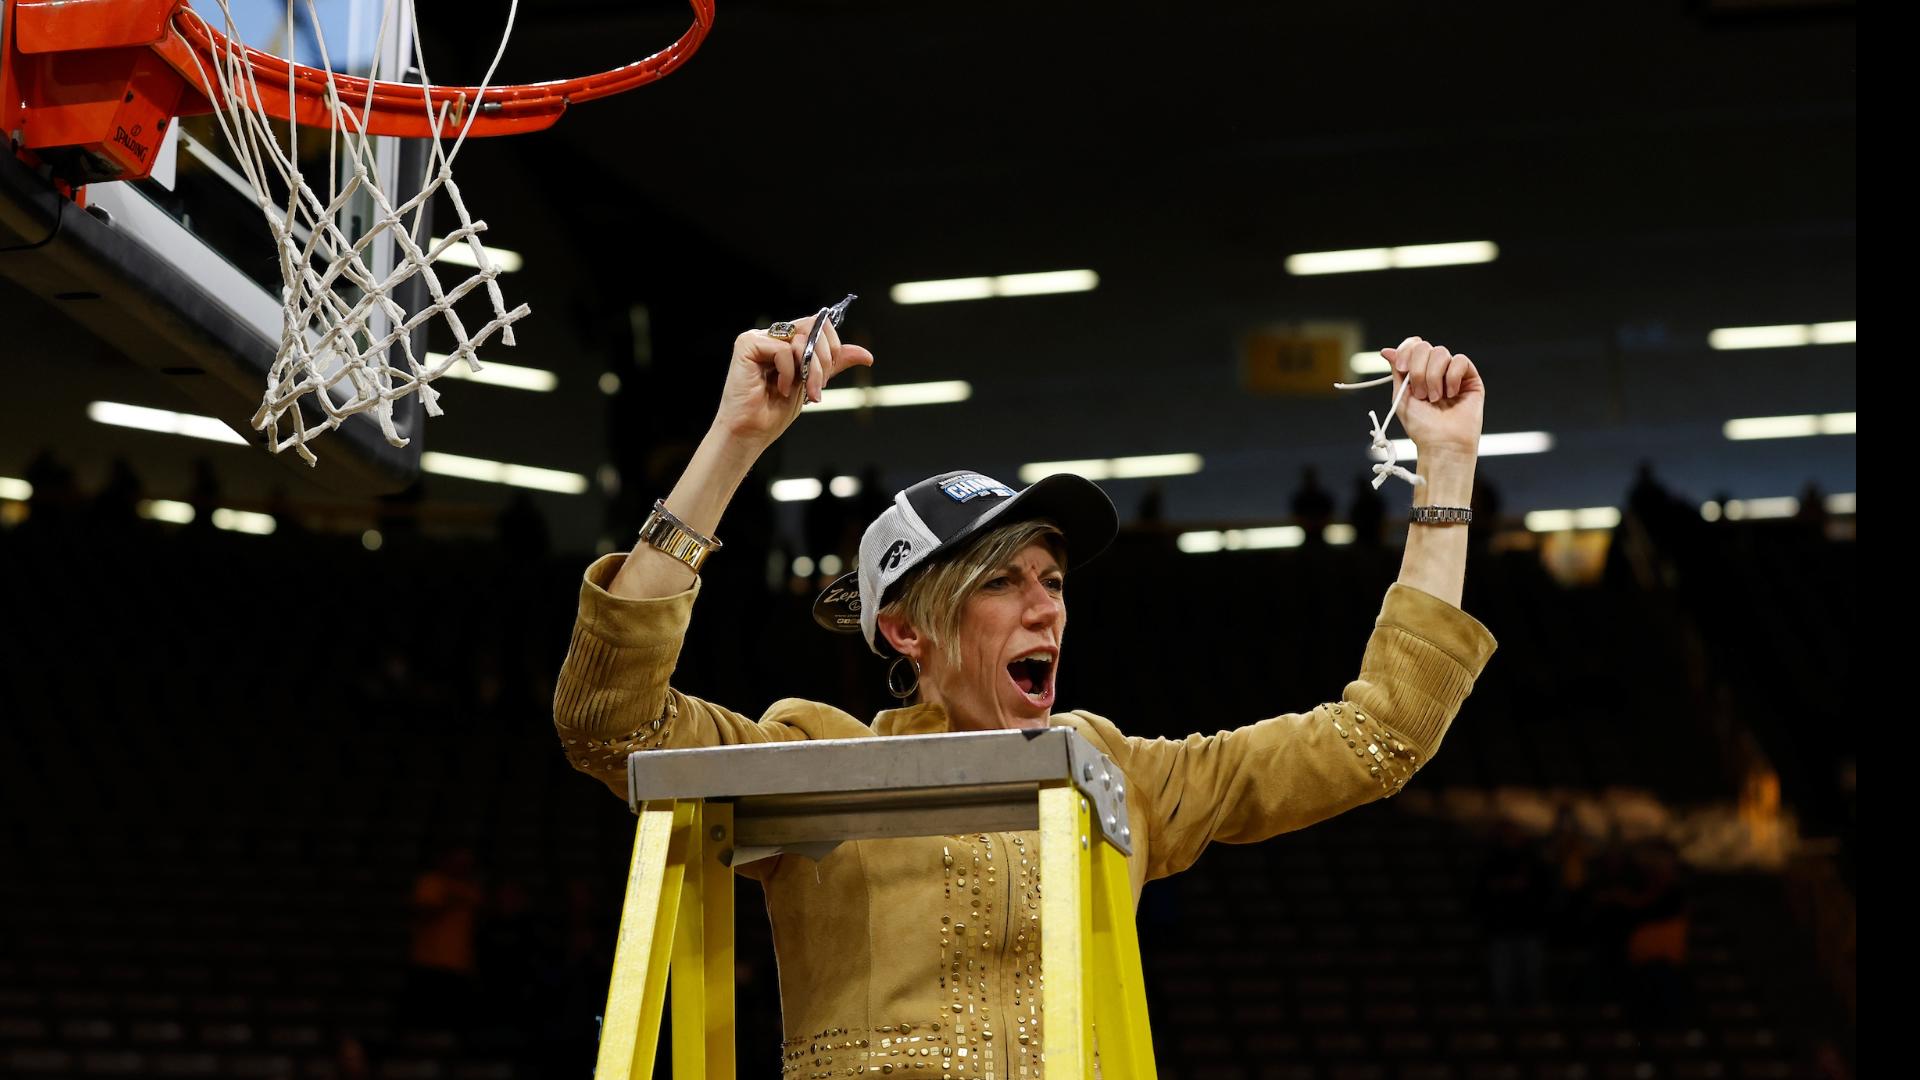 That loyalty was rewarded when Jensen, Iowa’s associate head coach the last 20 years, was elevated to head coach after Bluder announced her retirement Monday.